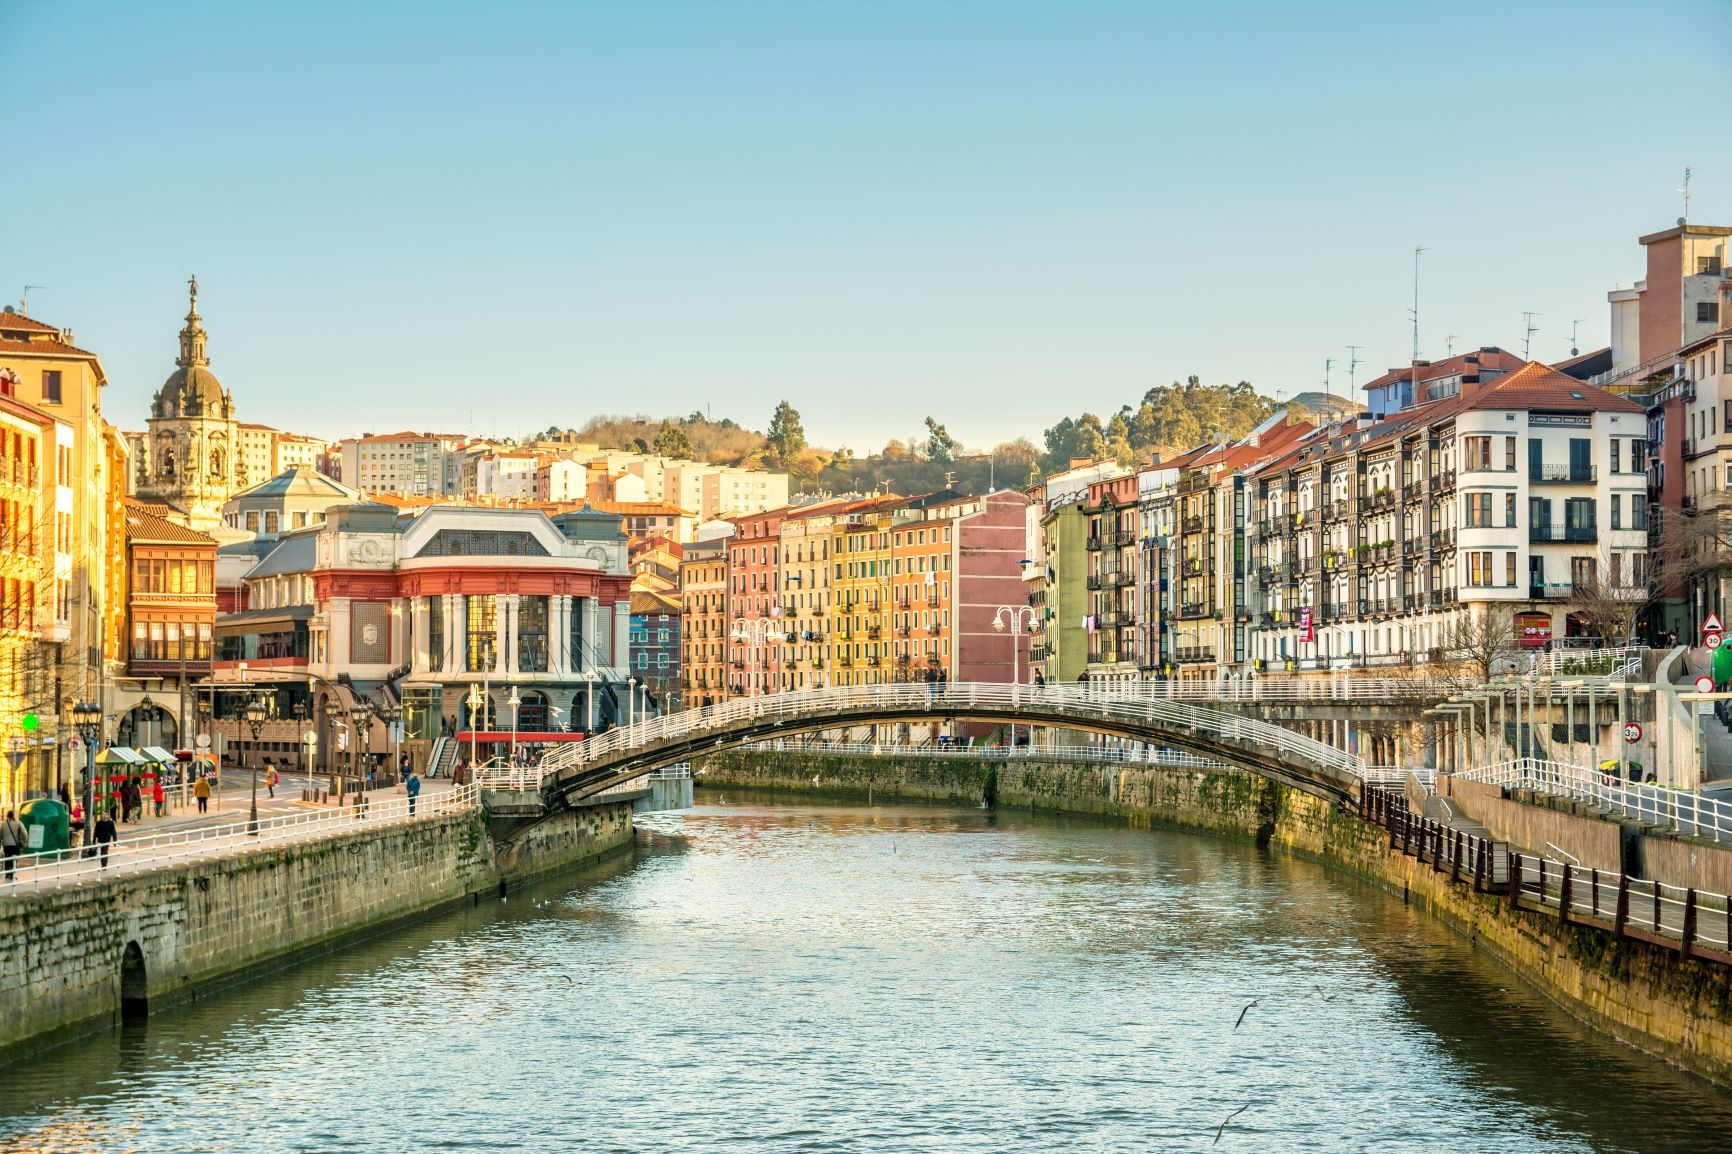 Things to see in Bilbao: plan your trip to make the most of it